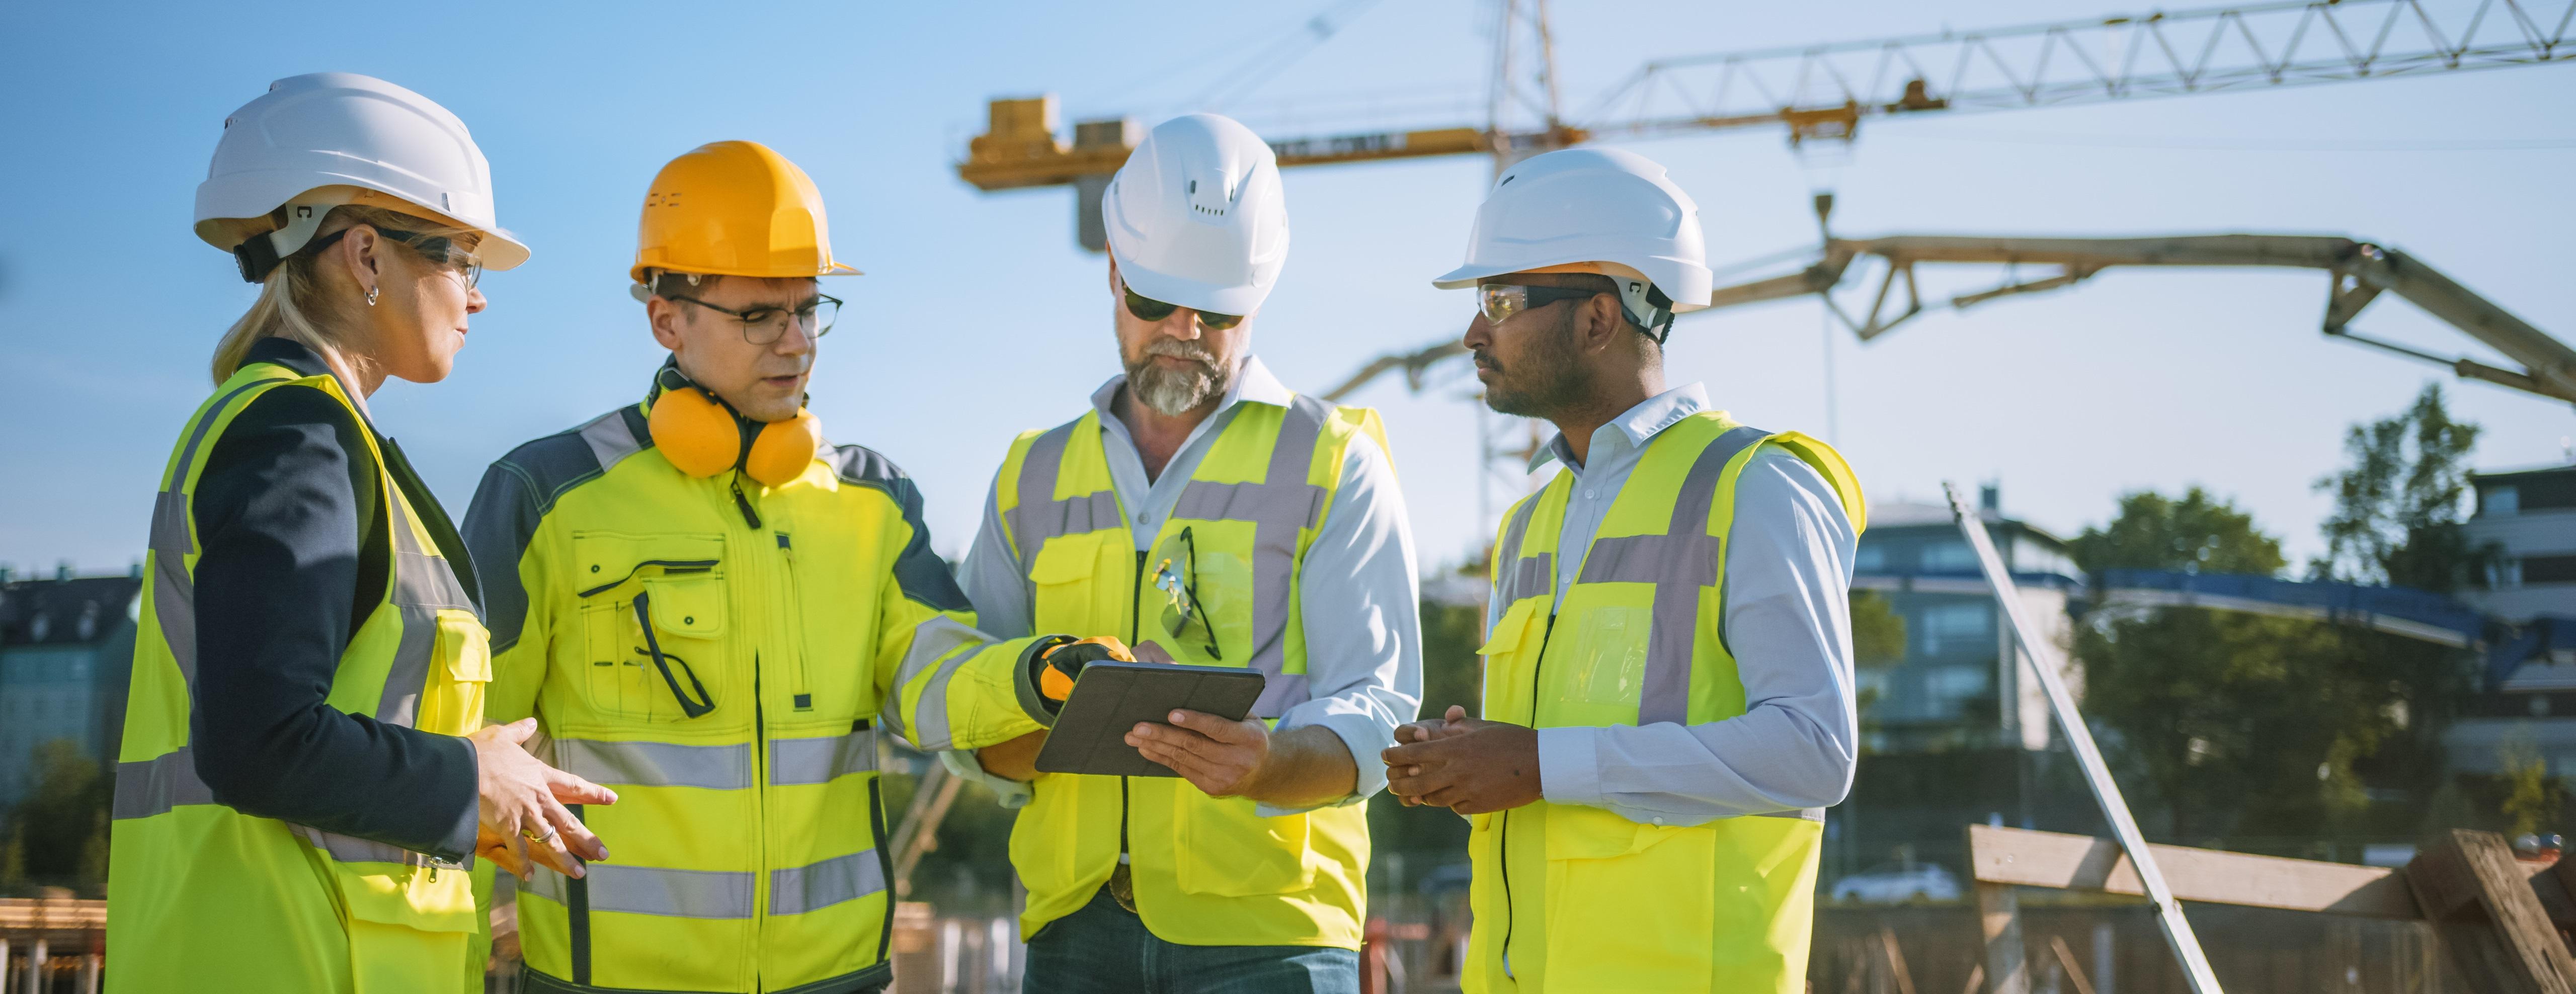 An expert discussion in front of a construction site